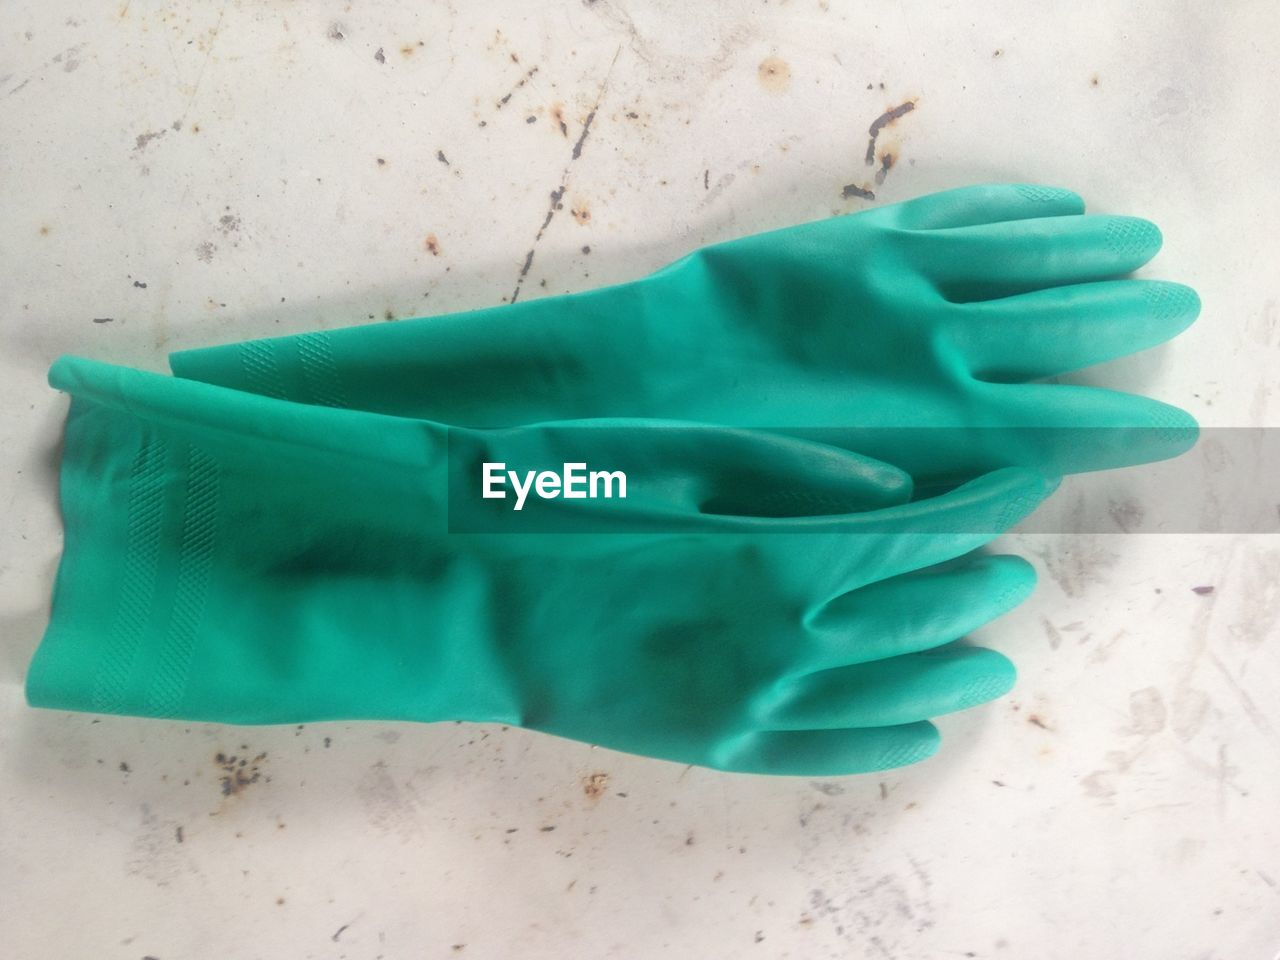 Pair of green washing up gloves on floor